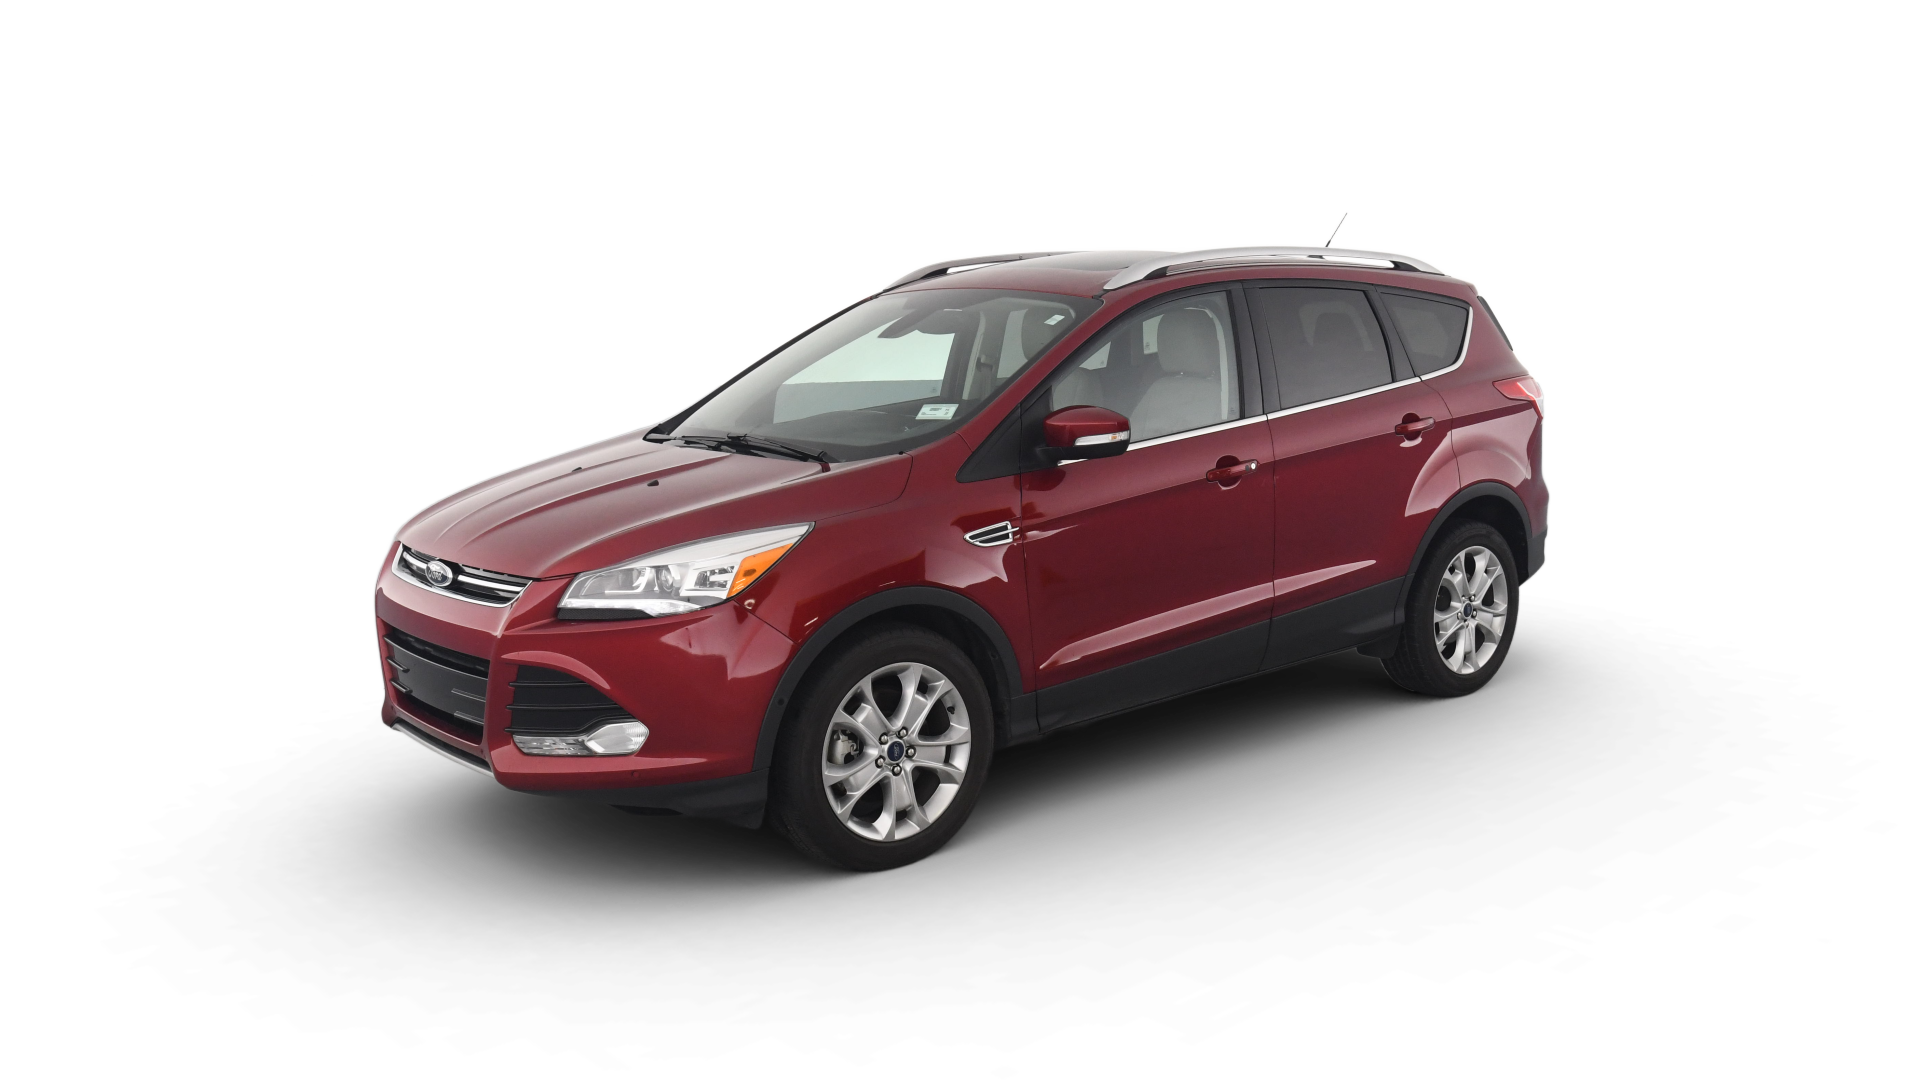 Used 2015 Red Ford Escape For Sale Online | Carvana